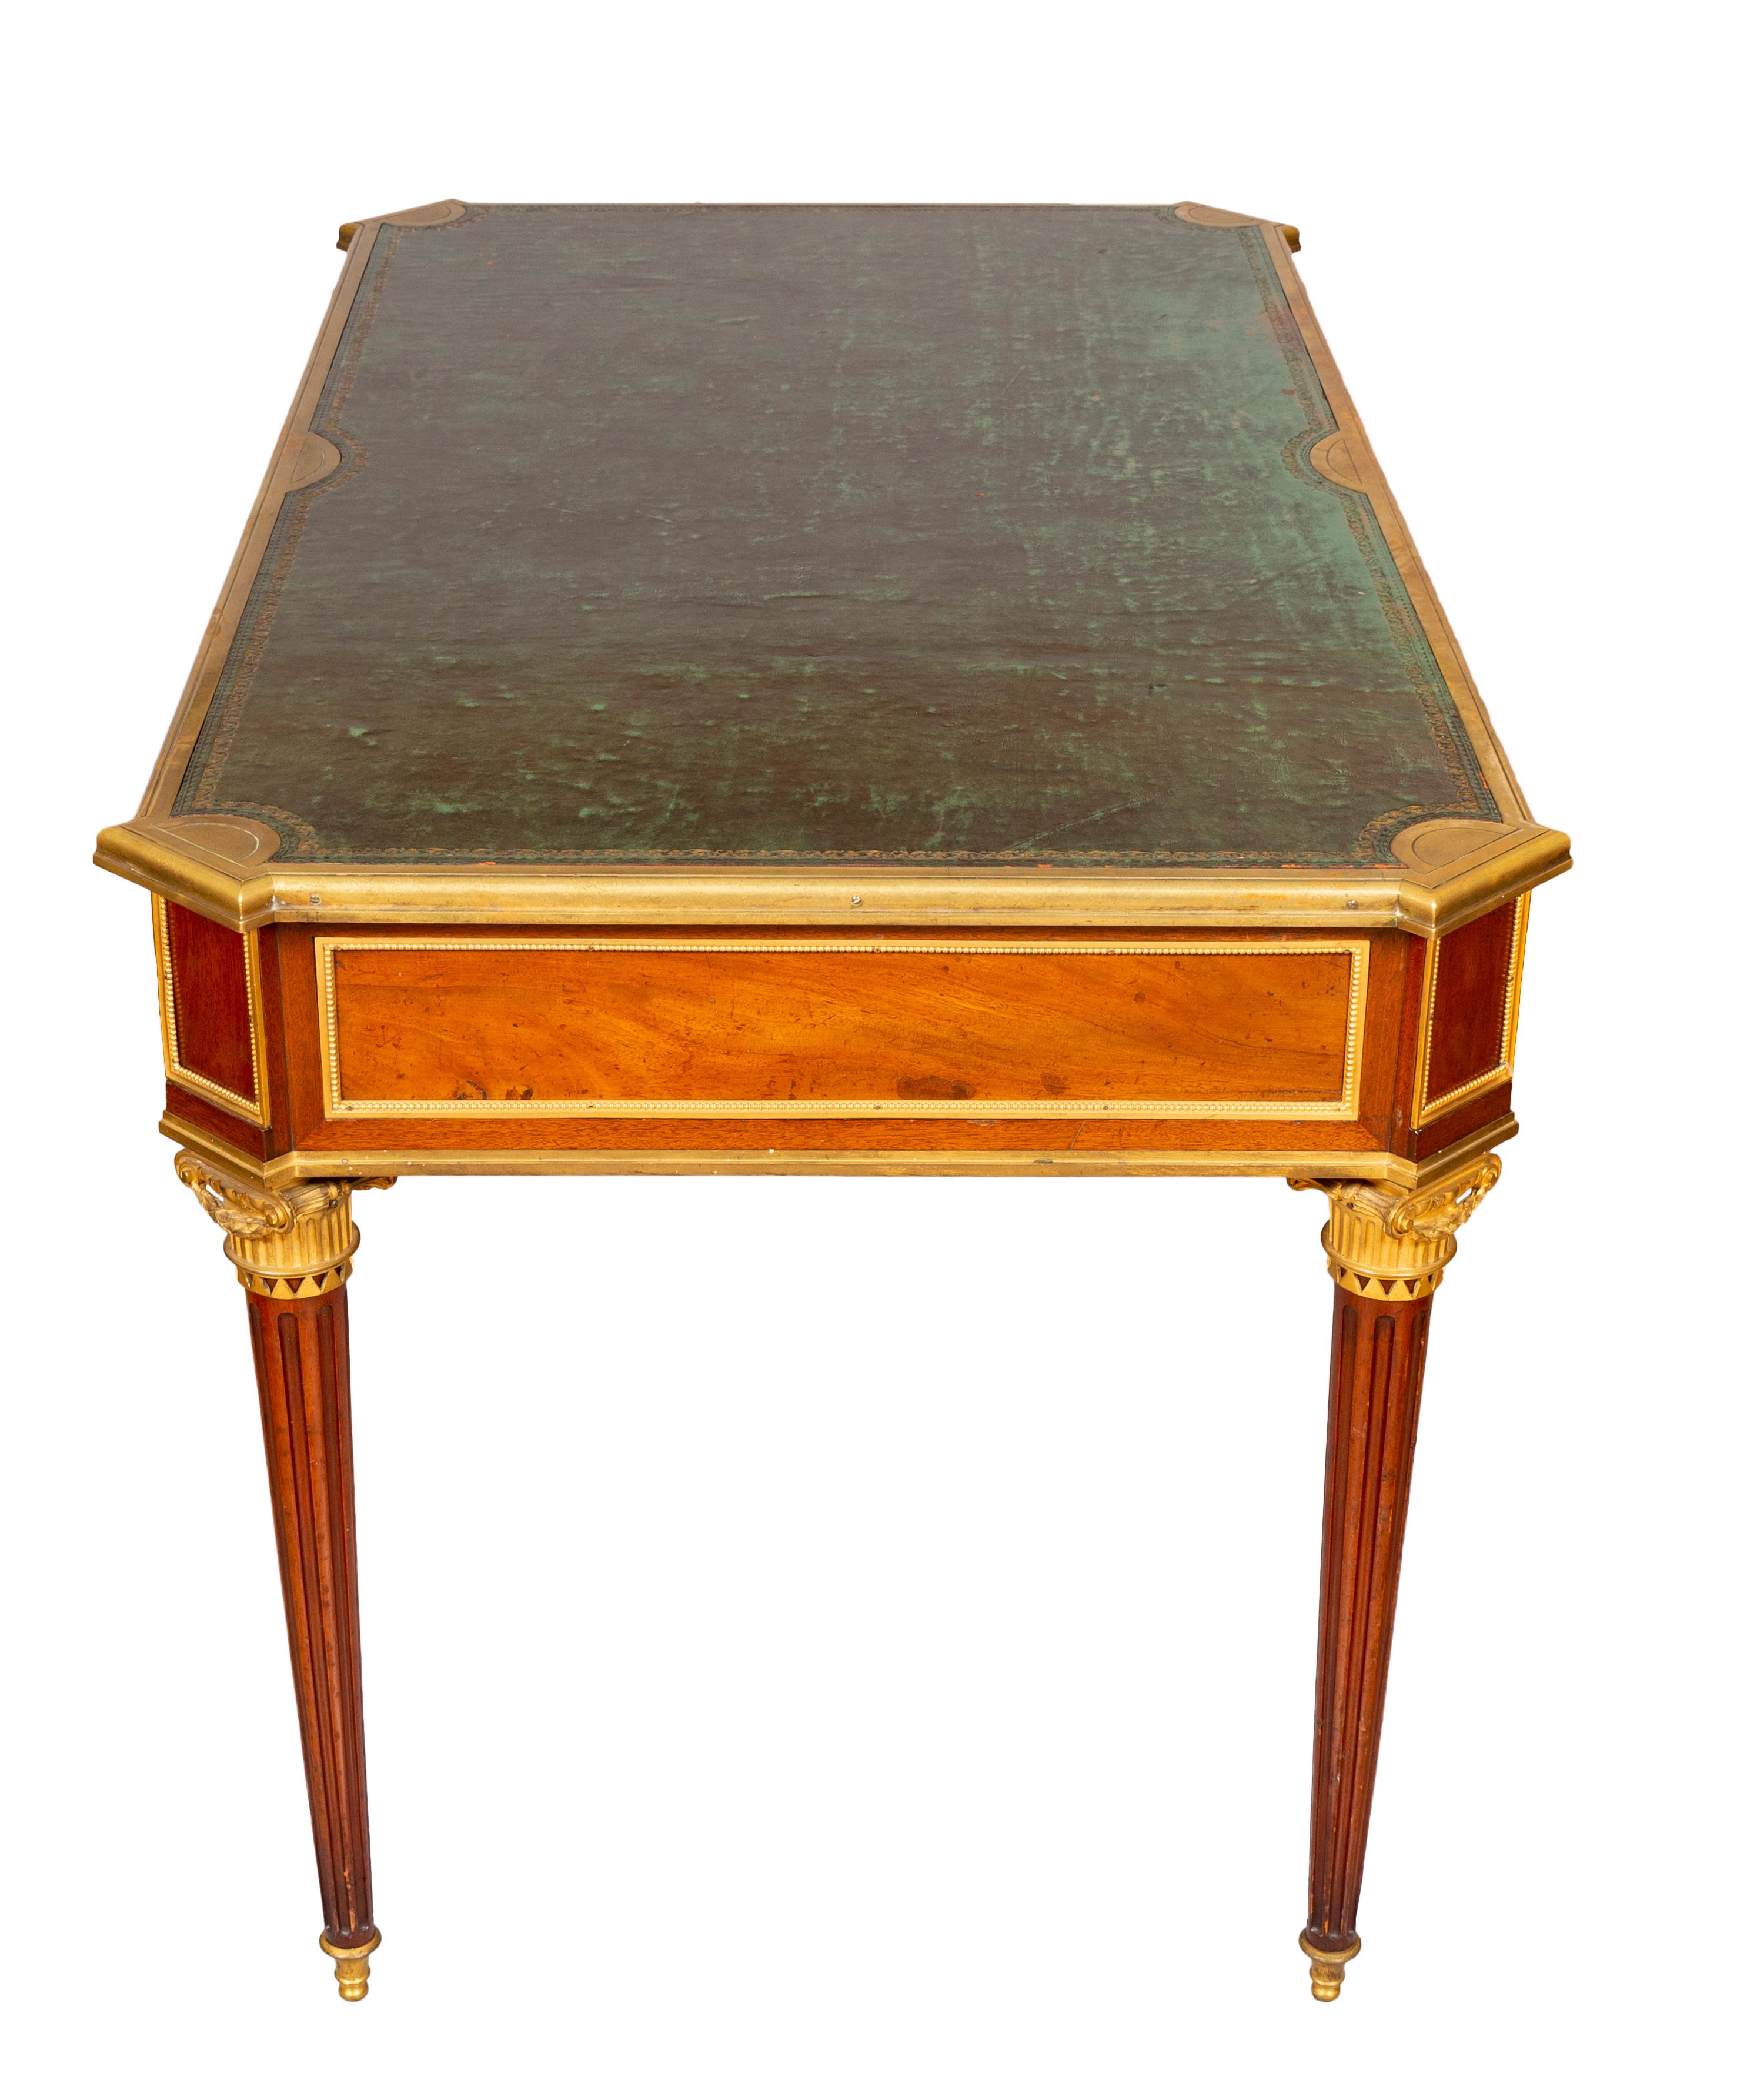 Louis XVI Mahogany And Ormolu Mounted Bureau Plat By Martin Carlin In Good Condition For Sale In Essex, MA